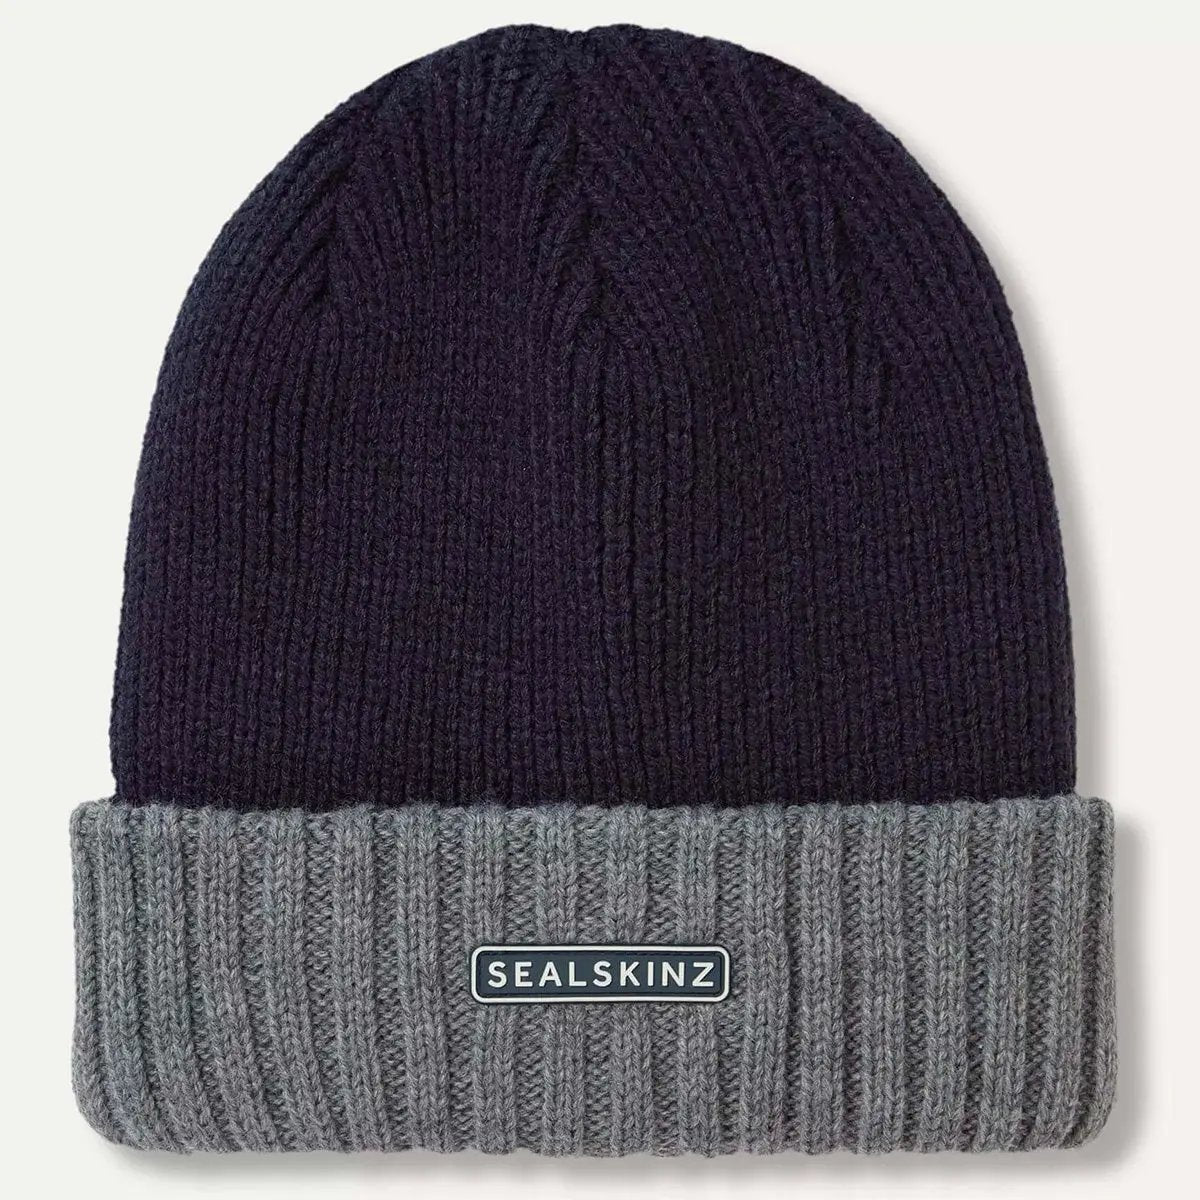 Sealskinz Bacton Waterproof Cold Weather Roll Cuff Beanie - John Bull Clothing